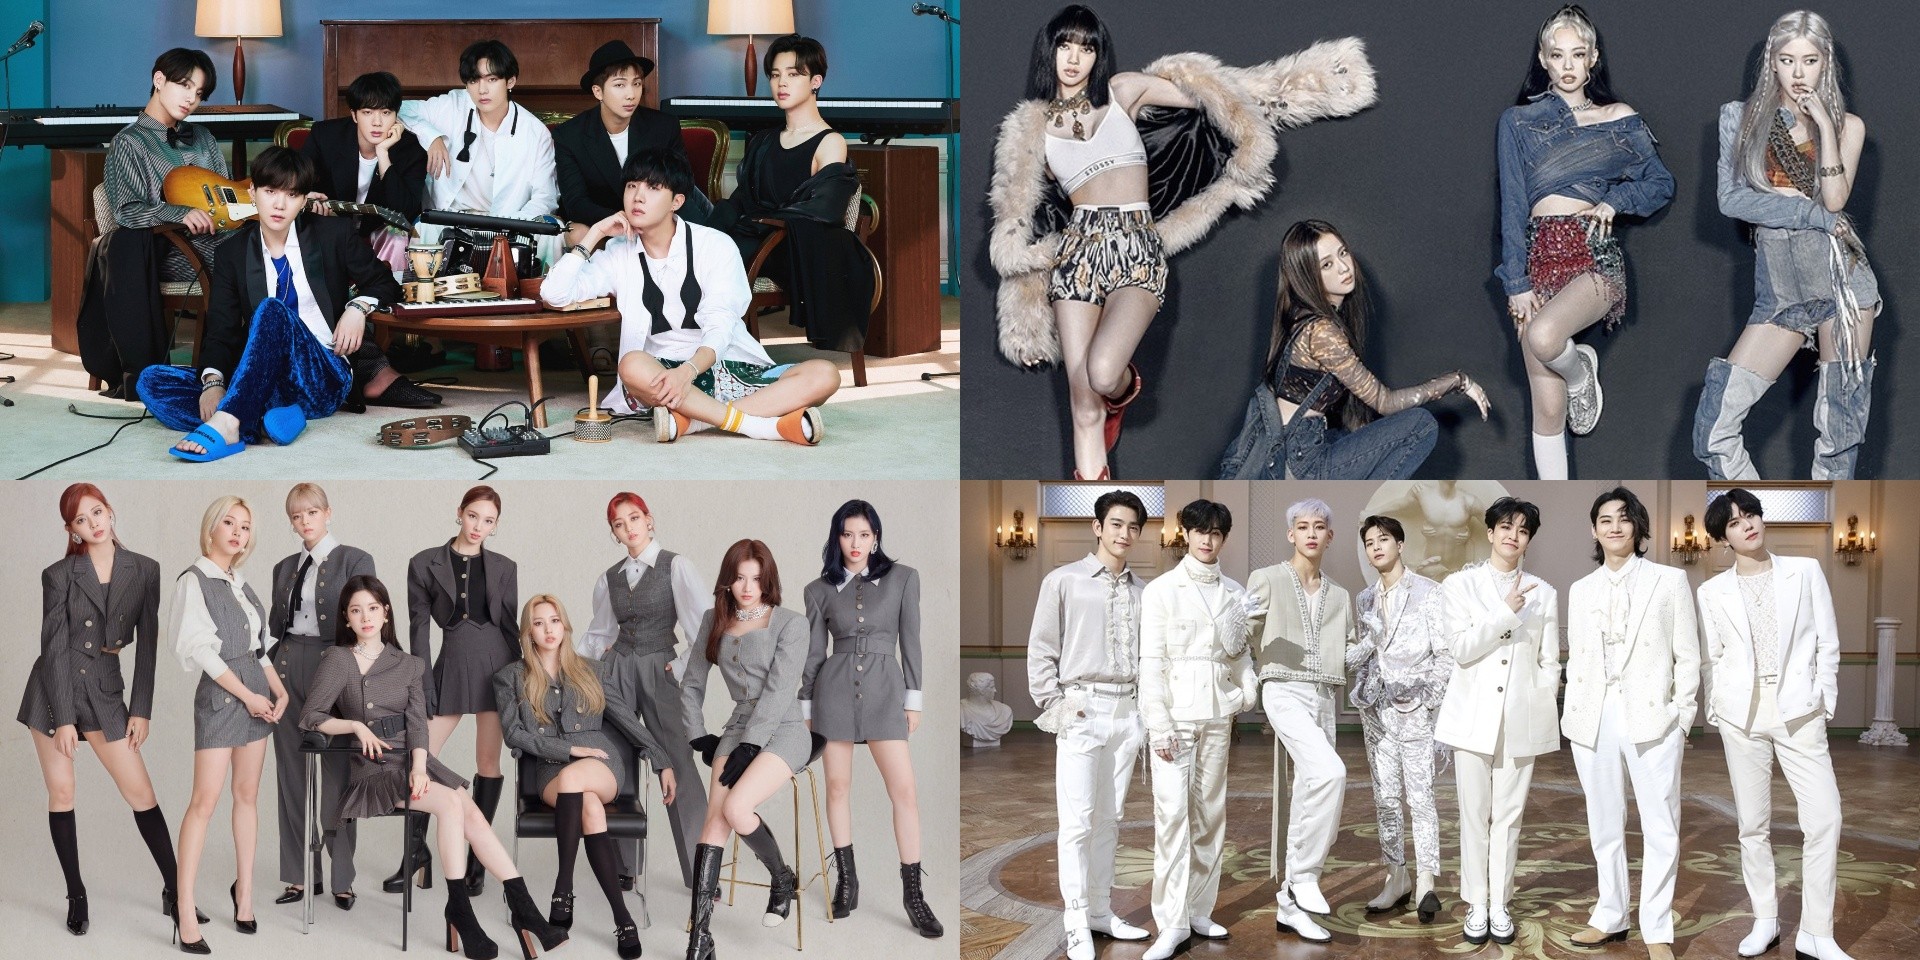 Nominees for 2020 APAN Music Awards revealed – BTS, BLACKPINK, TWICE, GOT7, and more